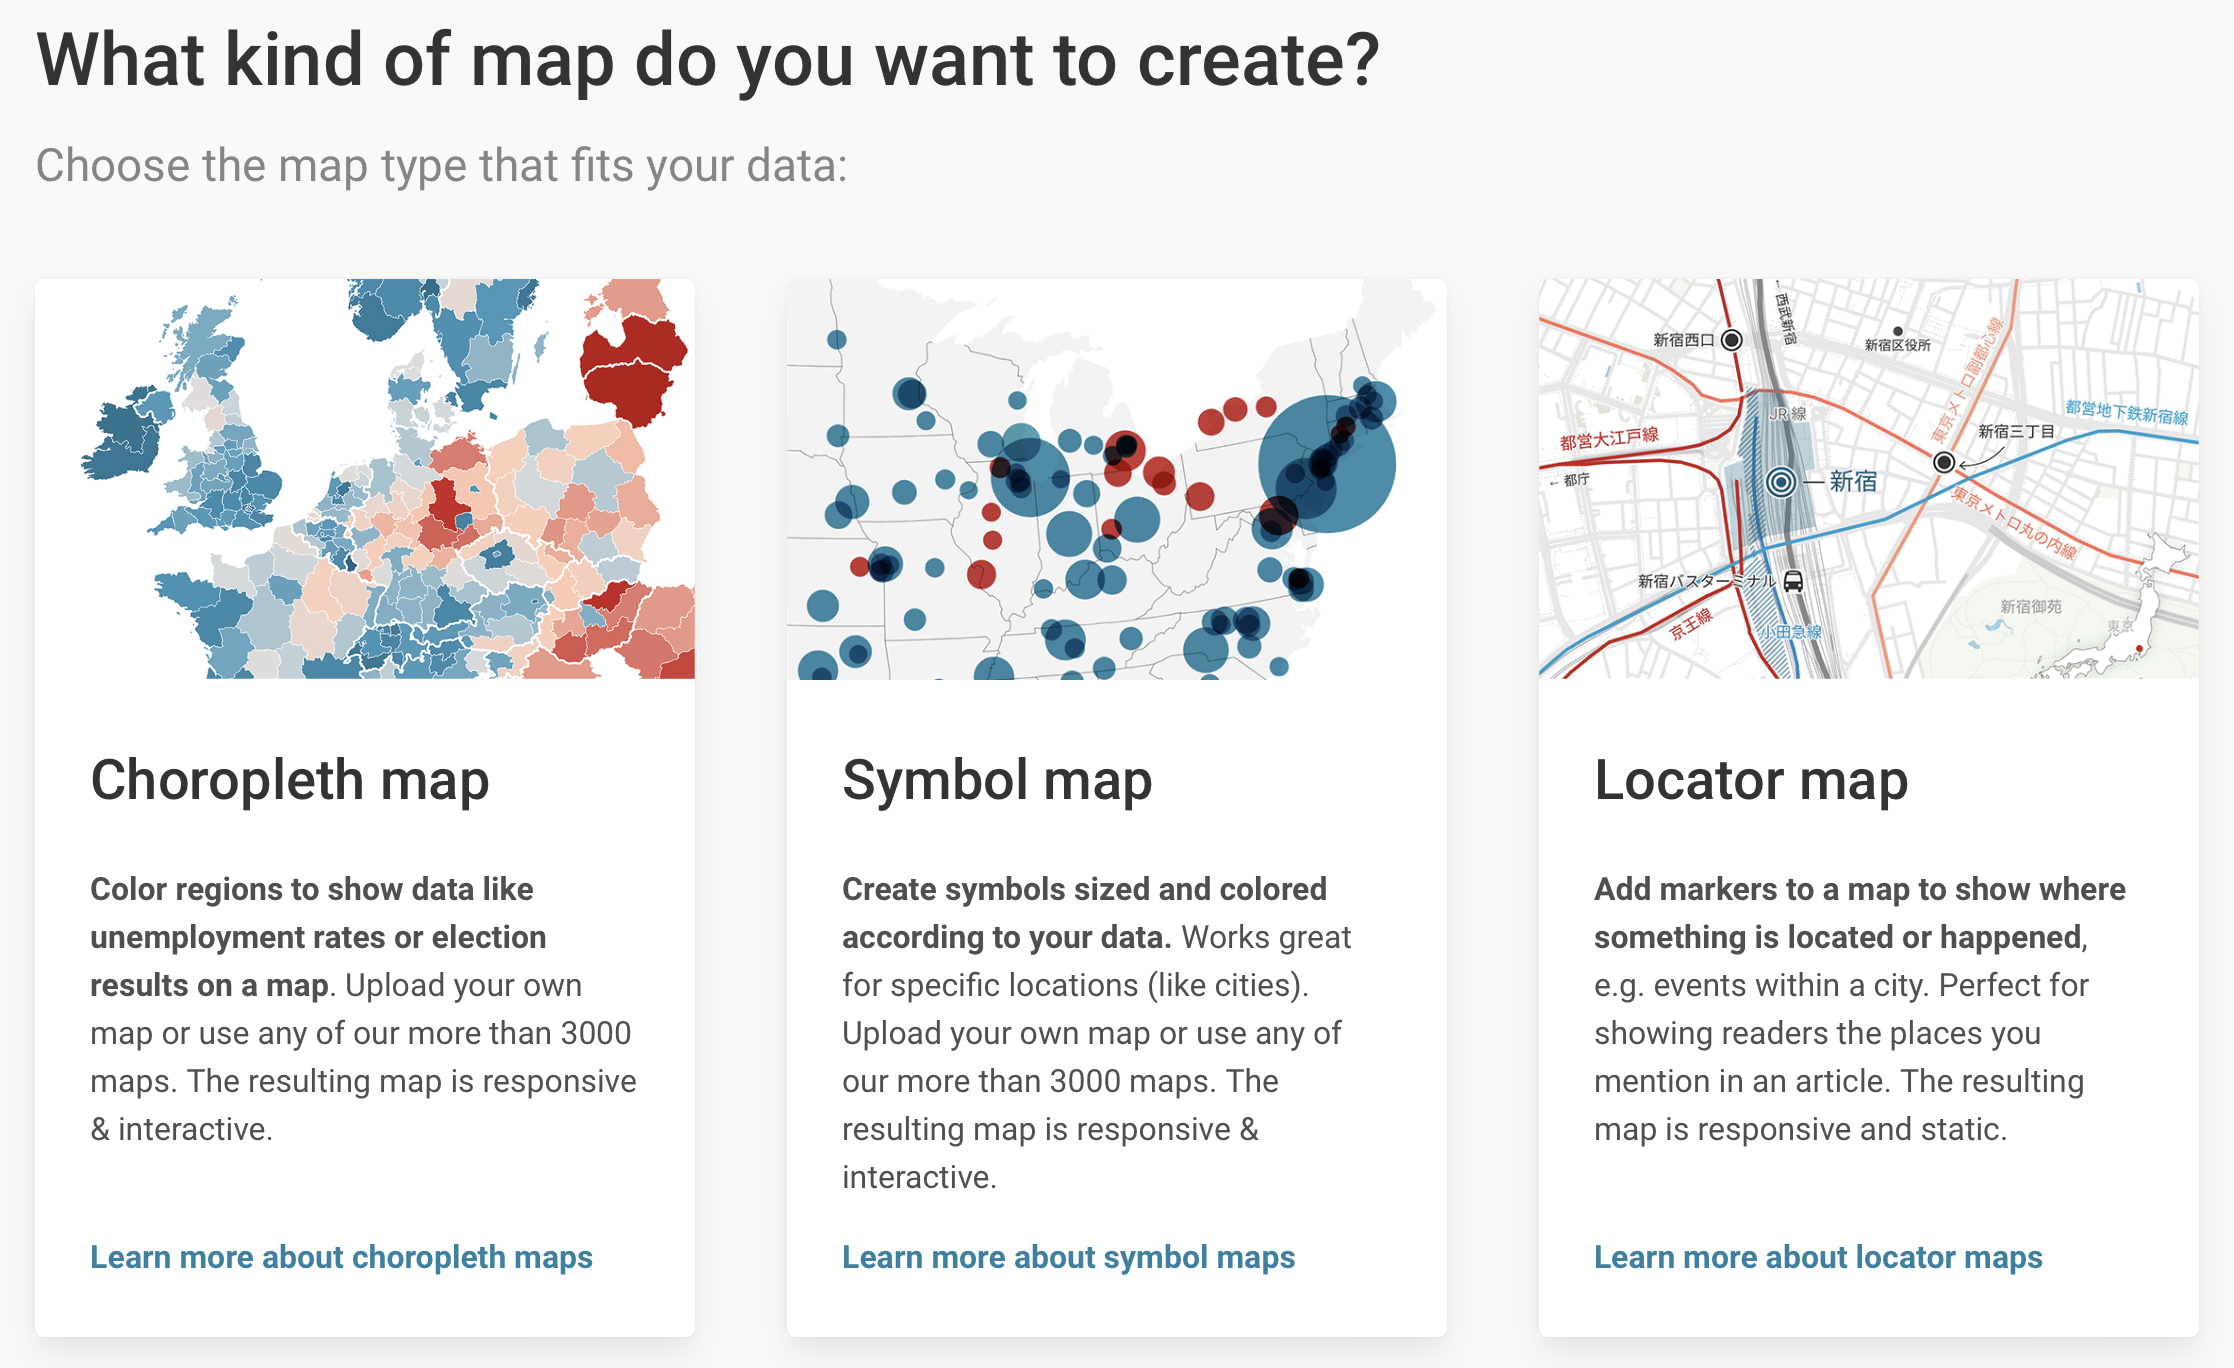 Start to create a symbol map in Datawrapper.